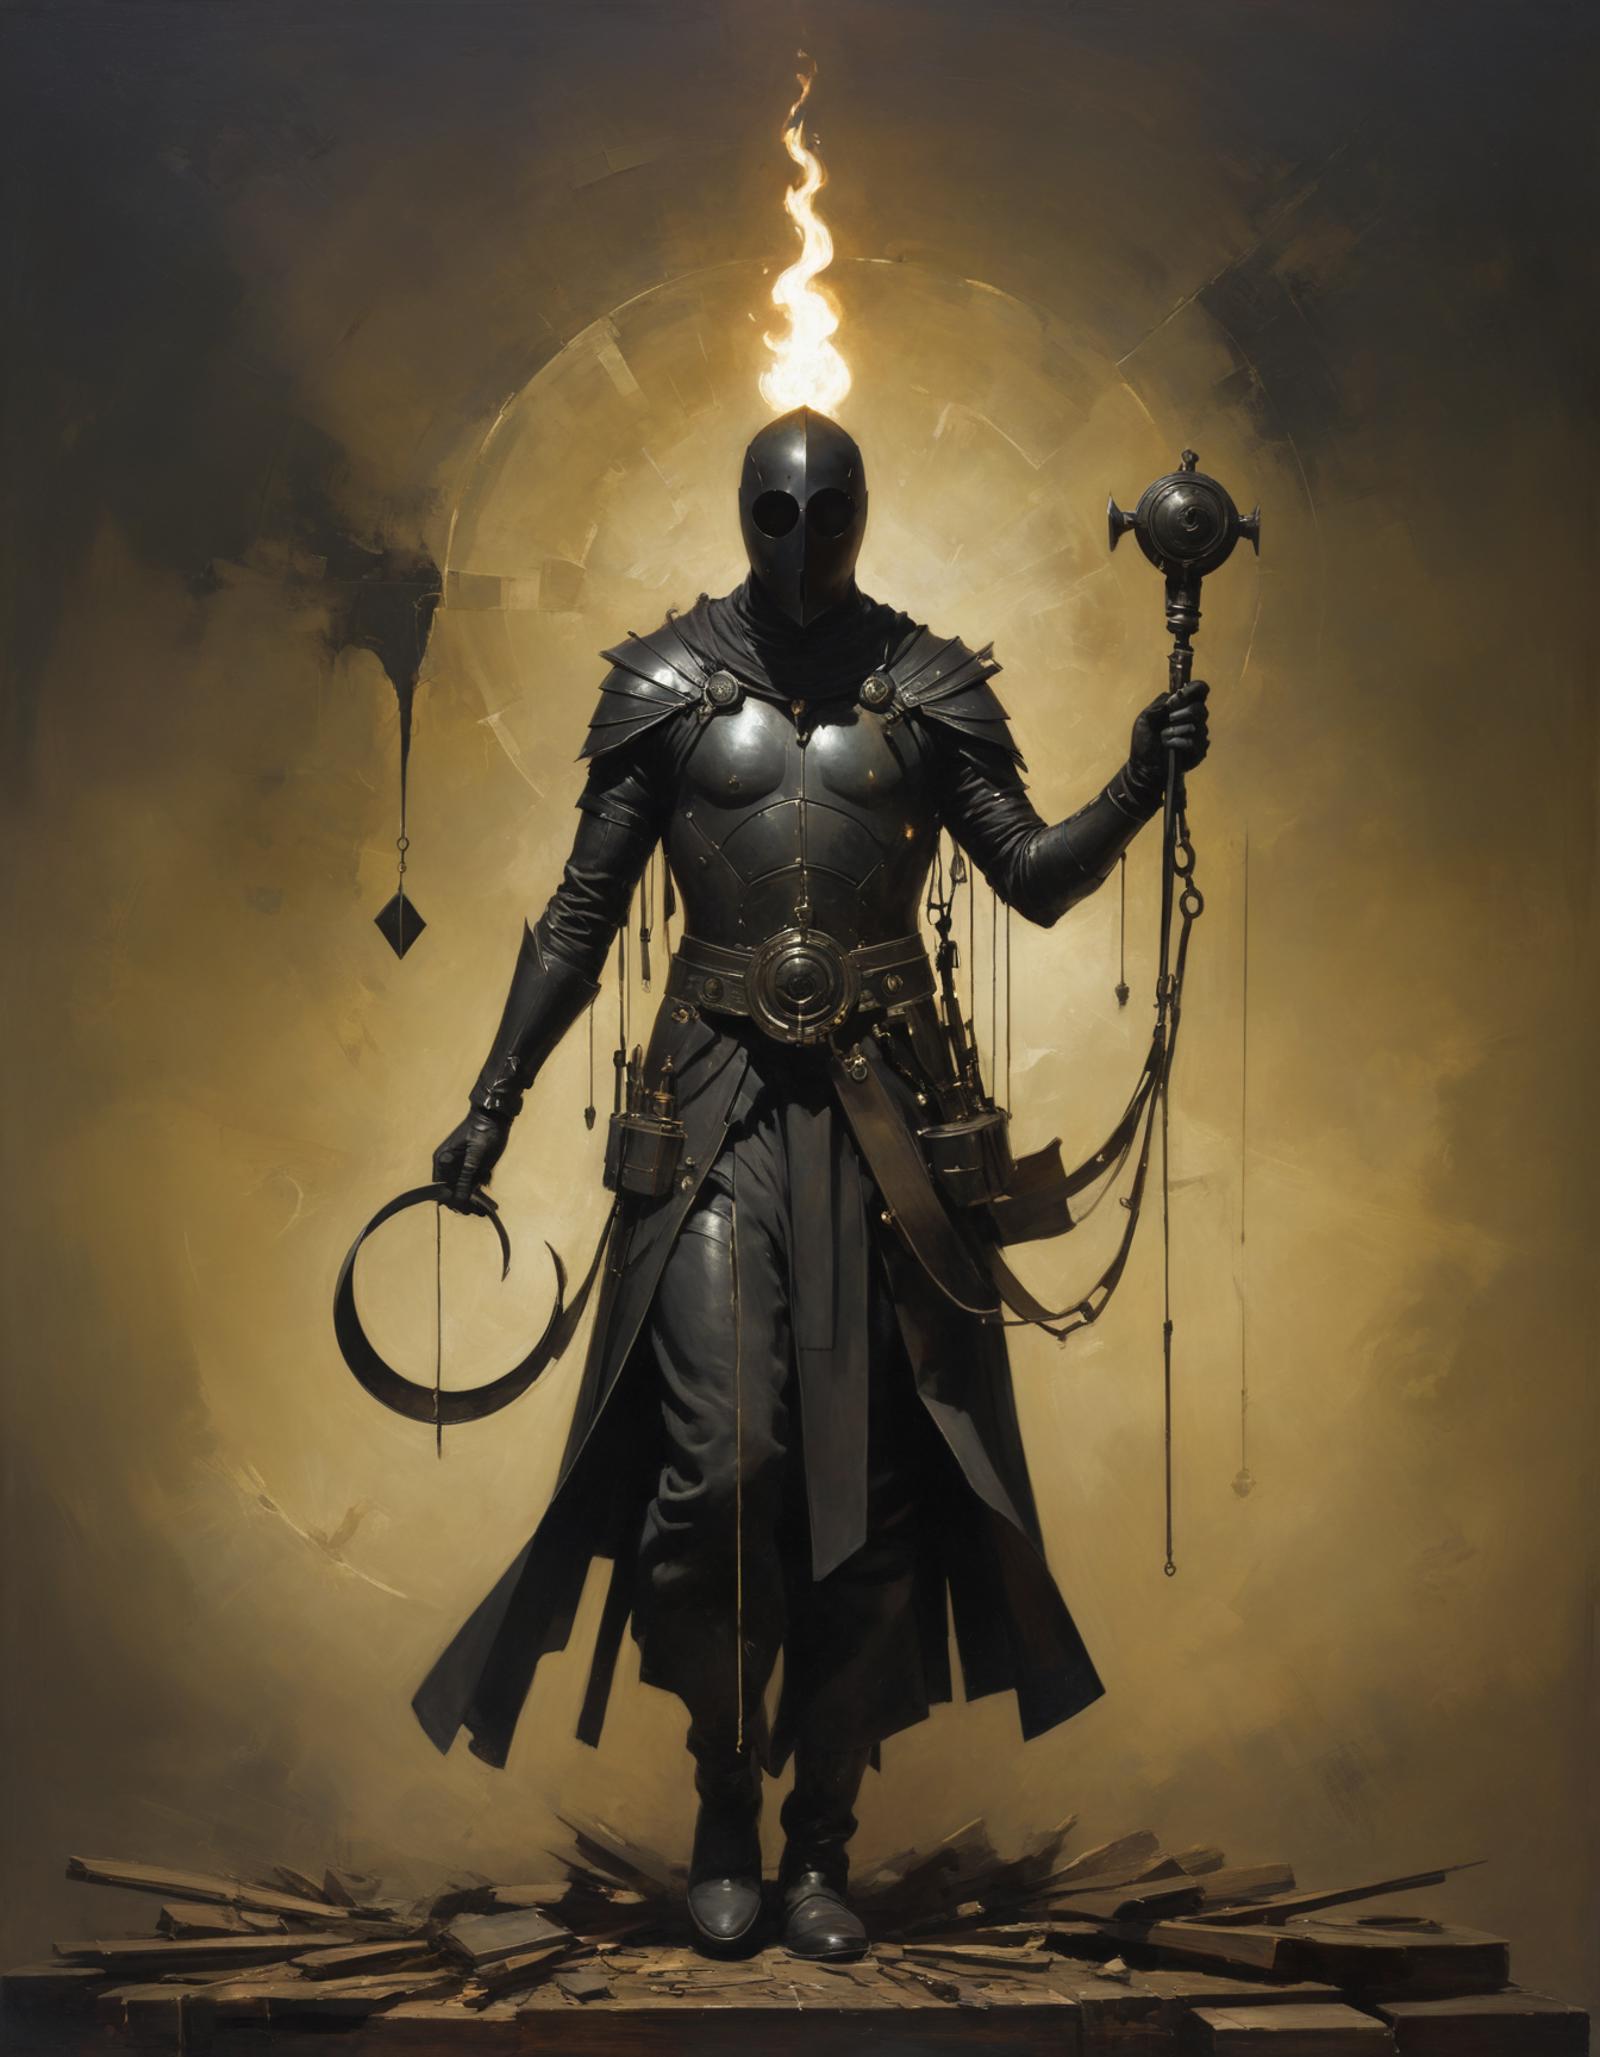 Dark Fantasy Art Featuring a Warrior Holding a Sword and a Chain, with a Glowing Aura in the Background